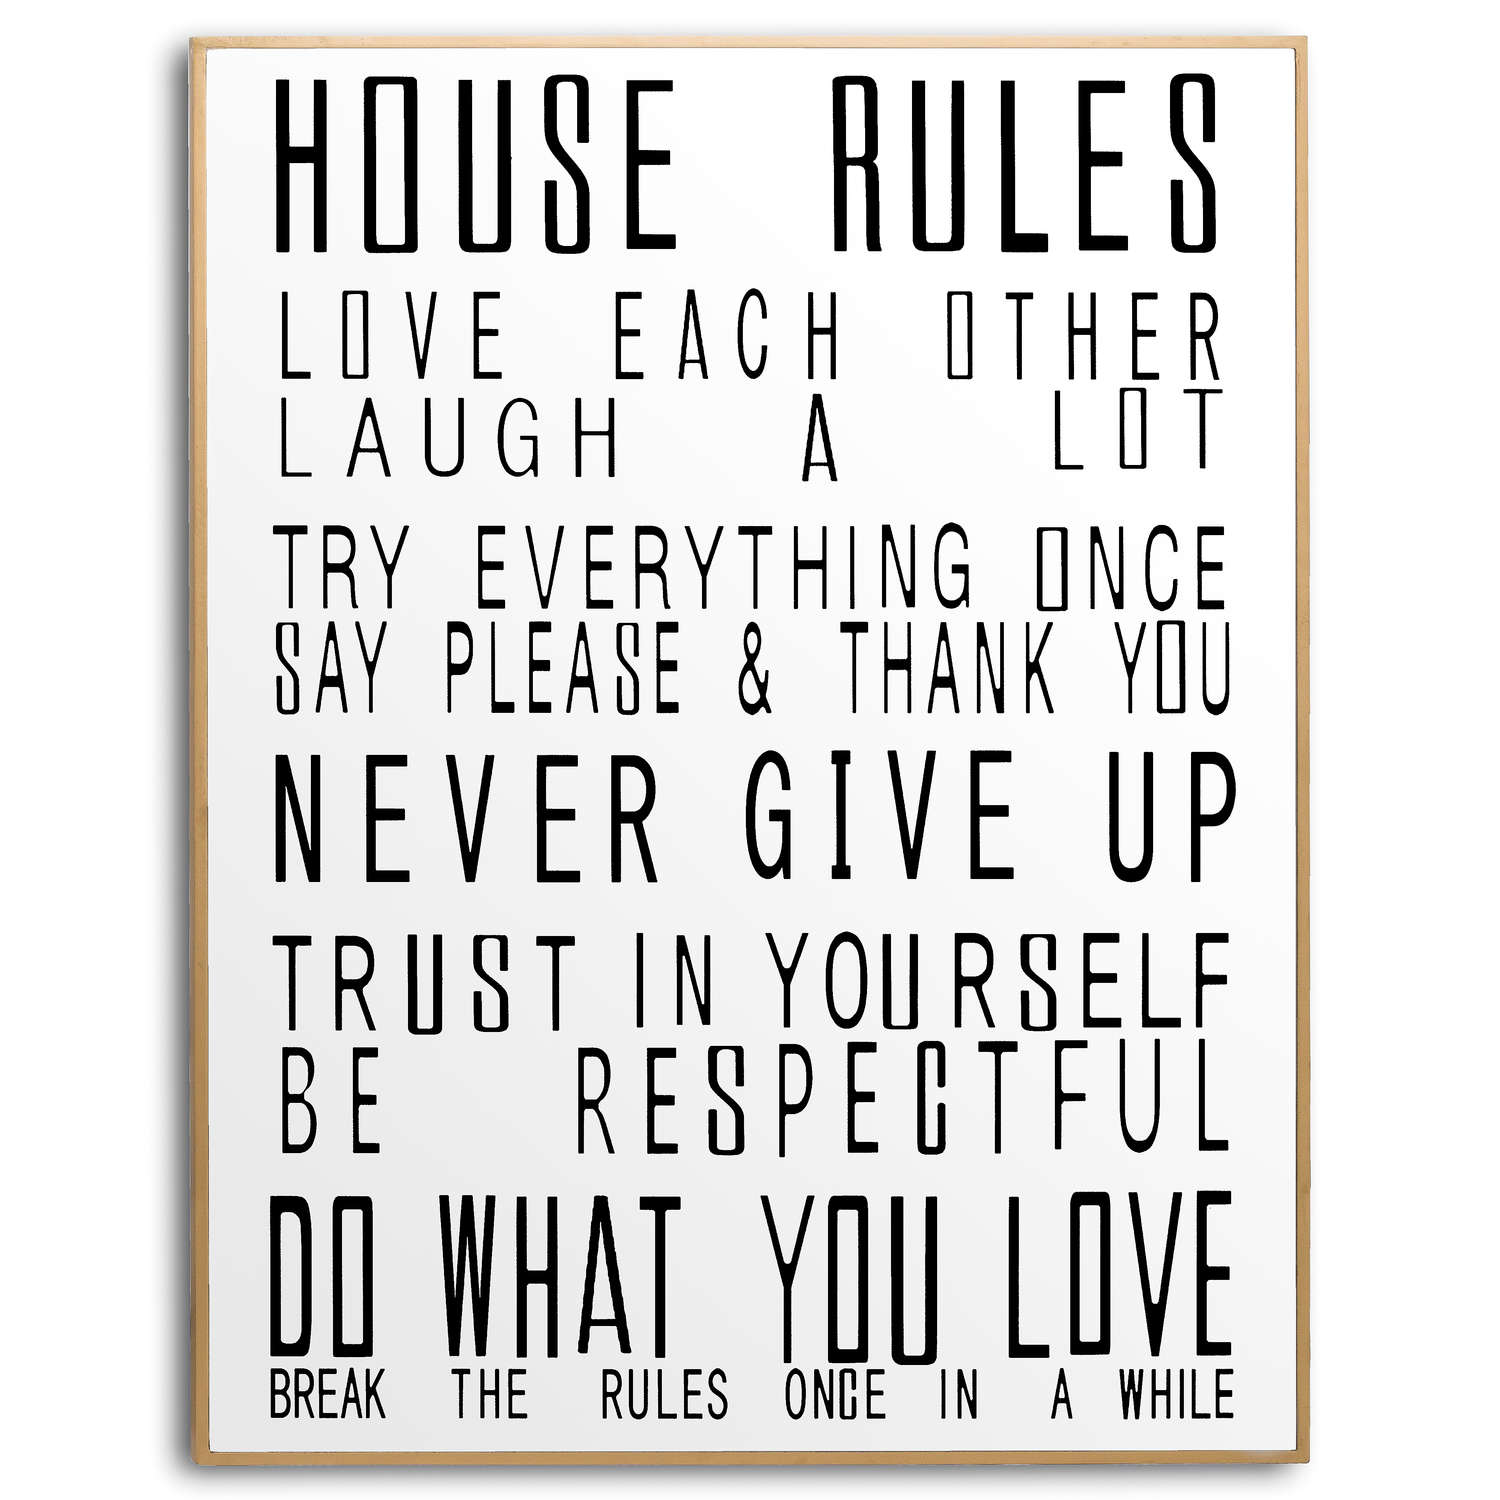 Large Glass House Rules Wall Art - Image 1